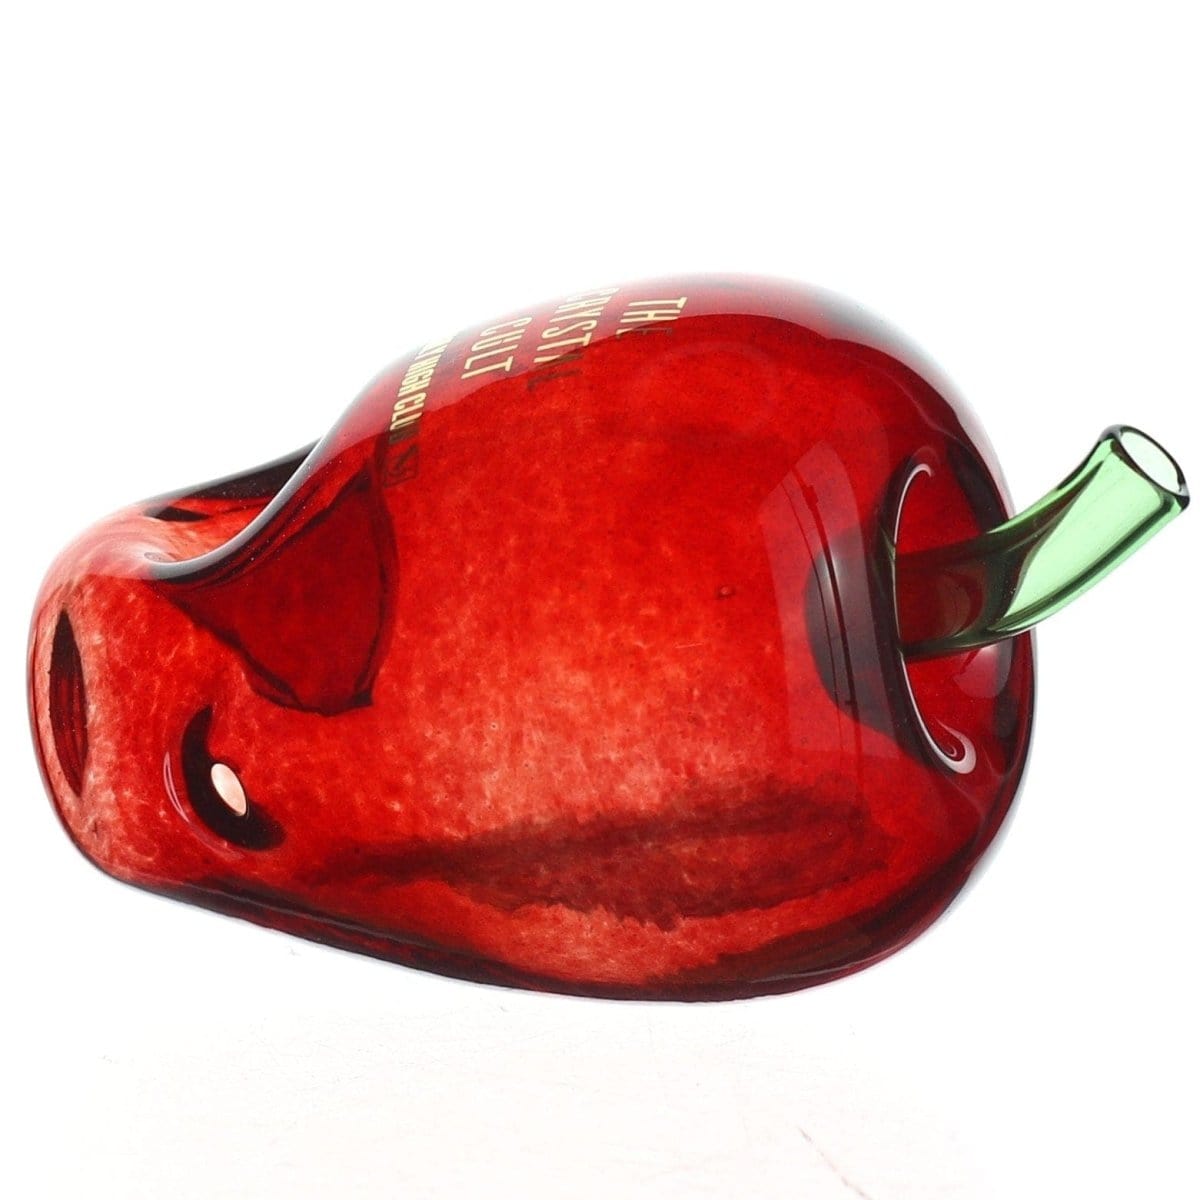 Daily High Club Glass Daily High Club x The Crystal Cult "Apple Hand" Pipe